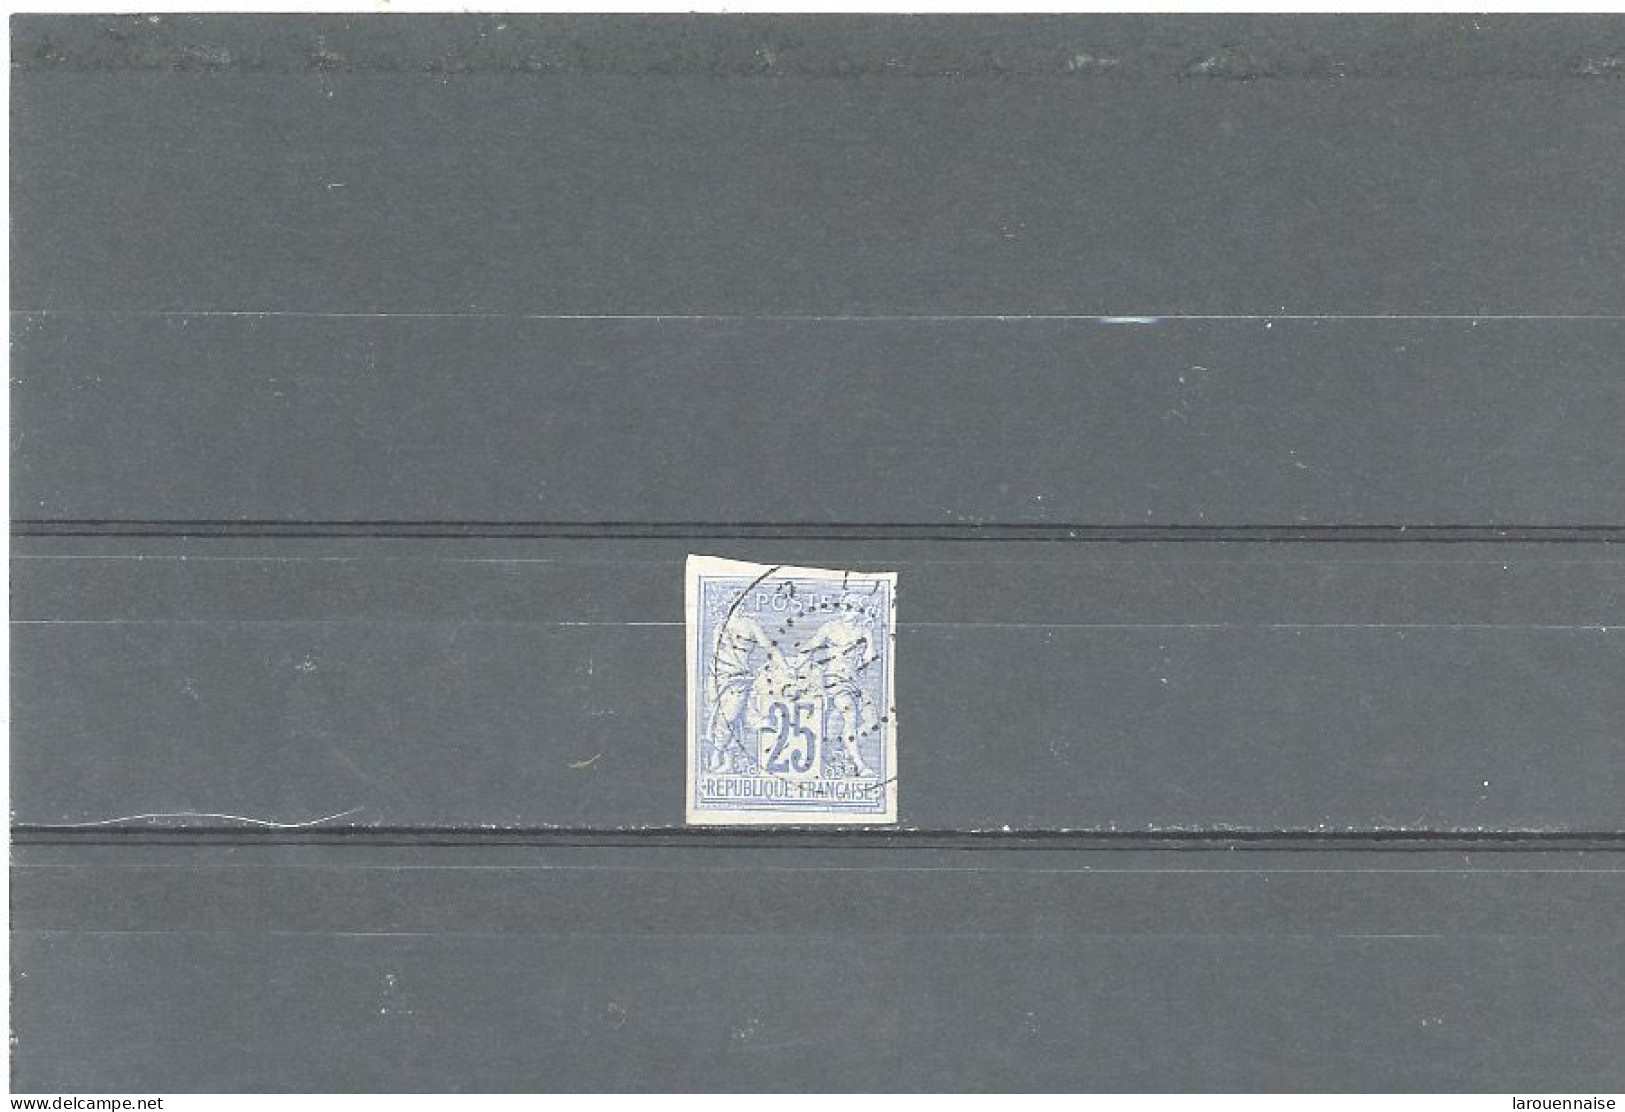 ANNAM ET TONKIN-COLONIES GÉNÉRALES-N°36 TYPE SAGE 25c OUTREMER TTB -Obl CàD. TO(NKIN)/*HAI-PH(ONG) && Juin 83 - Used Stamps